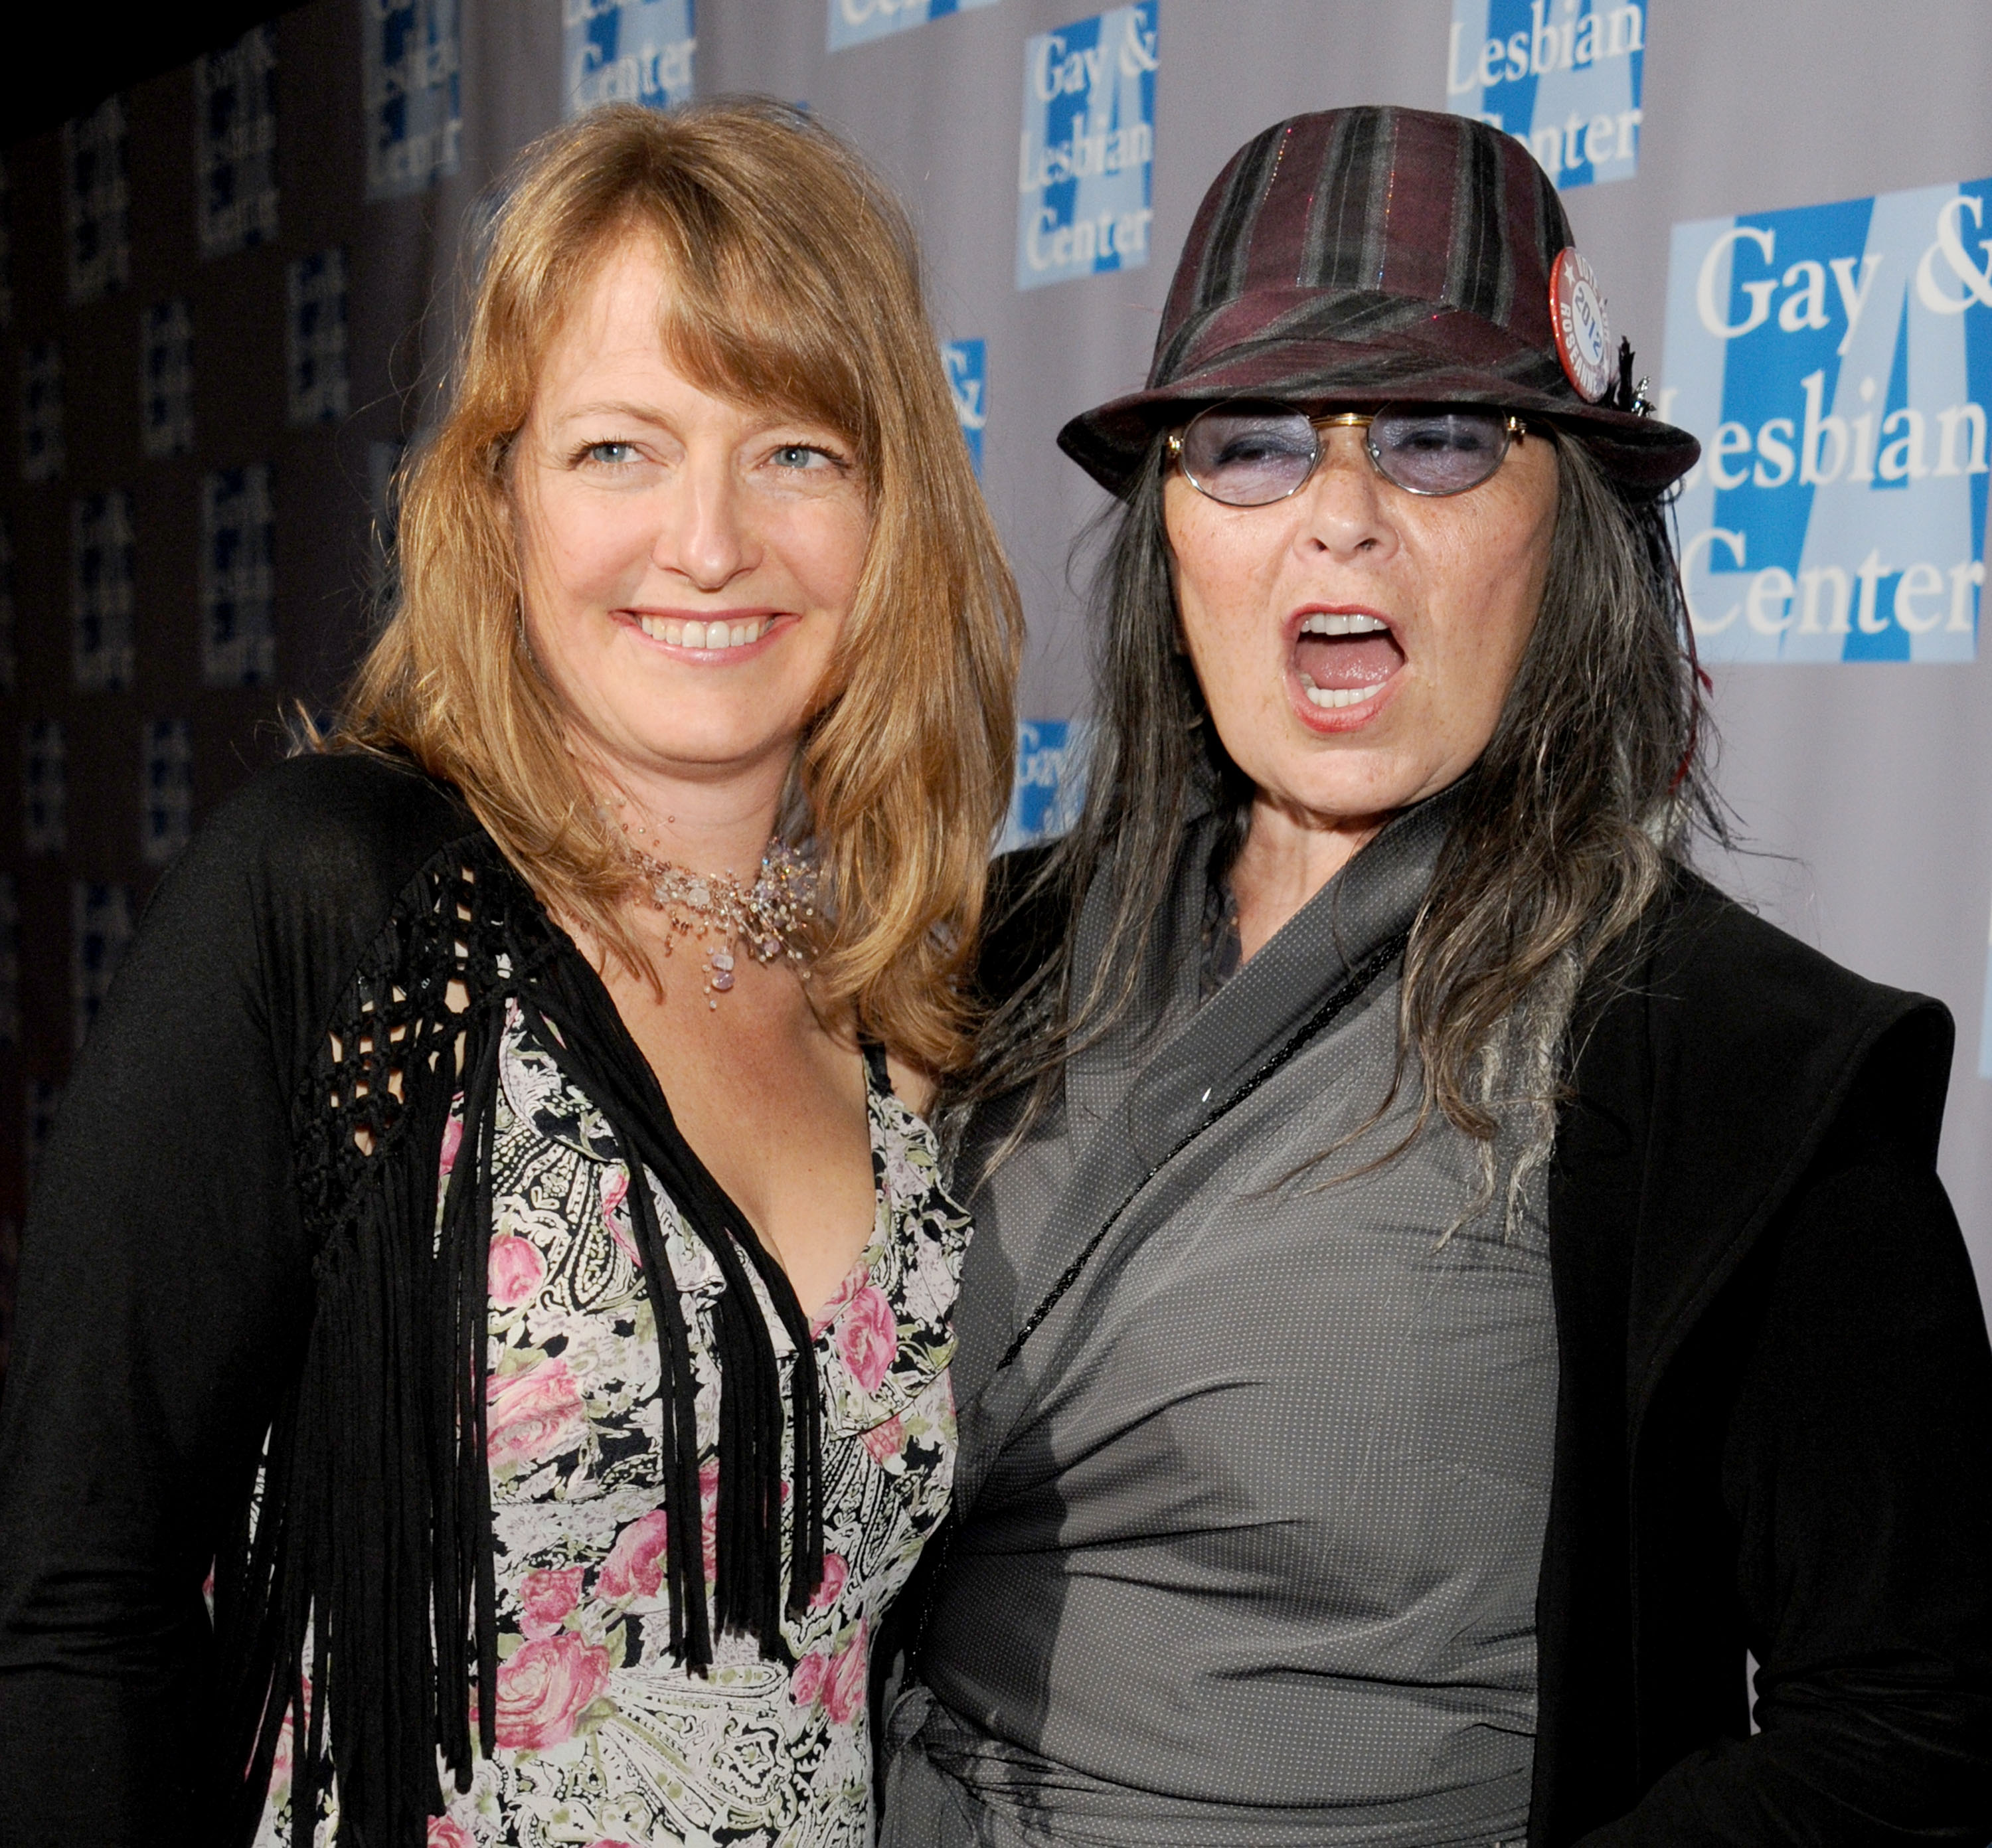 Actress Roseanne Barr (R) and her daughter arrive at the L.A. Gay & Lesbian Center's "An Evening With Women" at The Beverly Hilton Hotel on May 19, 2012 in Beverly Hills, California. | Source: Getty Images